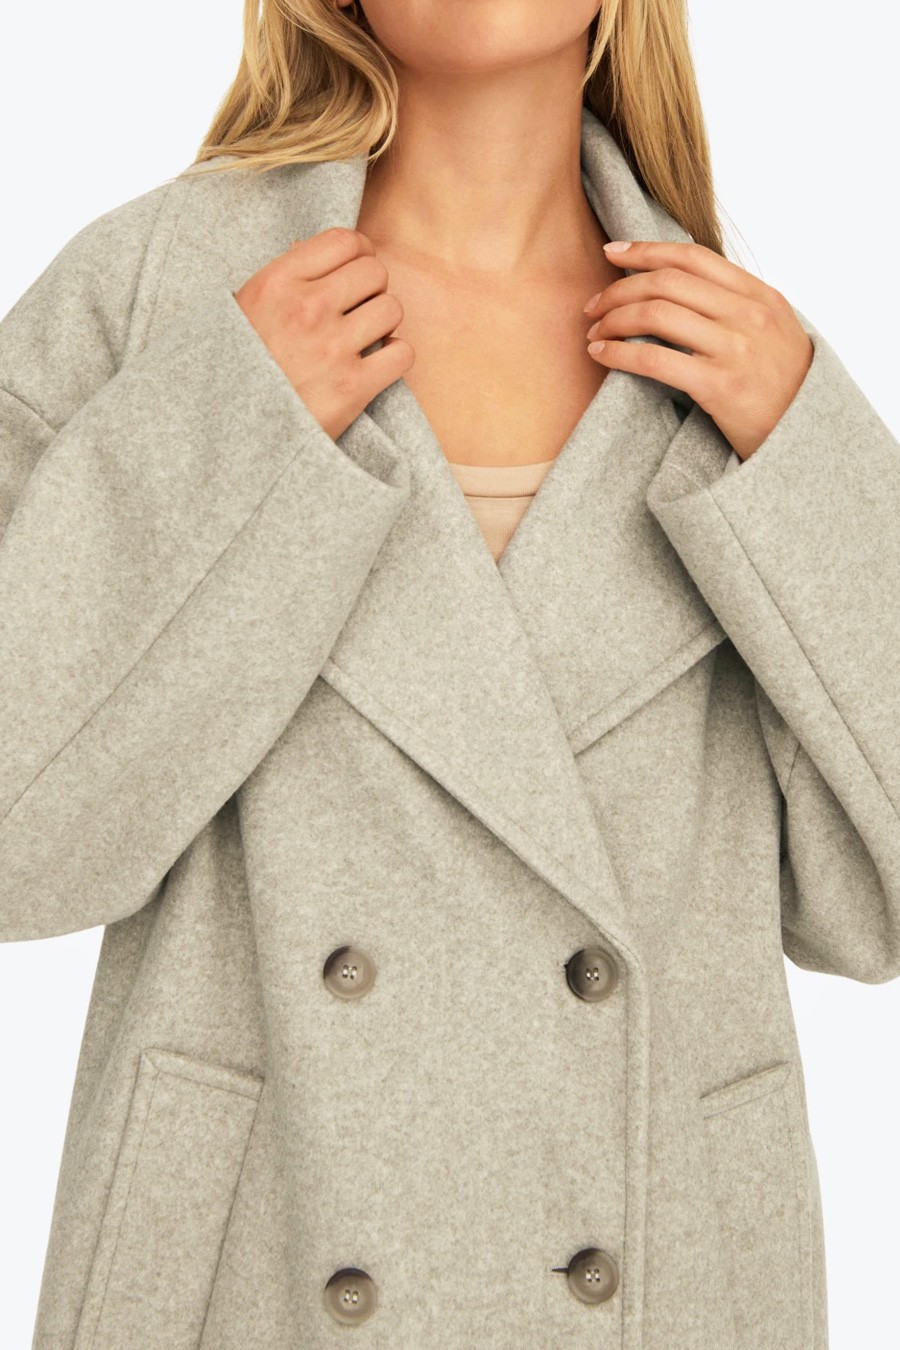 Coat ONLY 15307697-Weathered-Tea